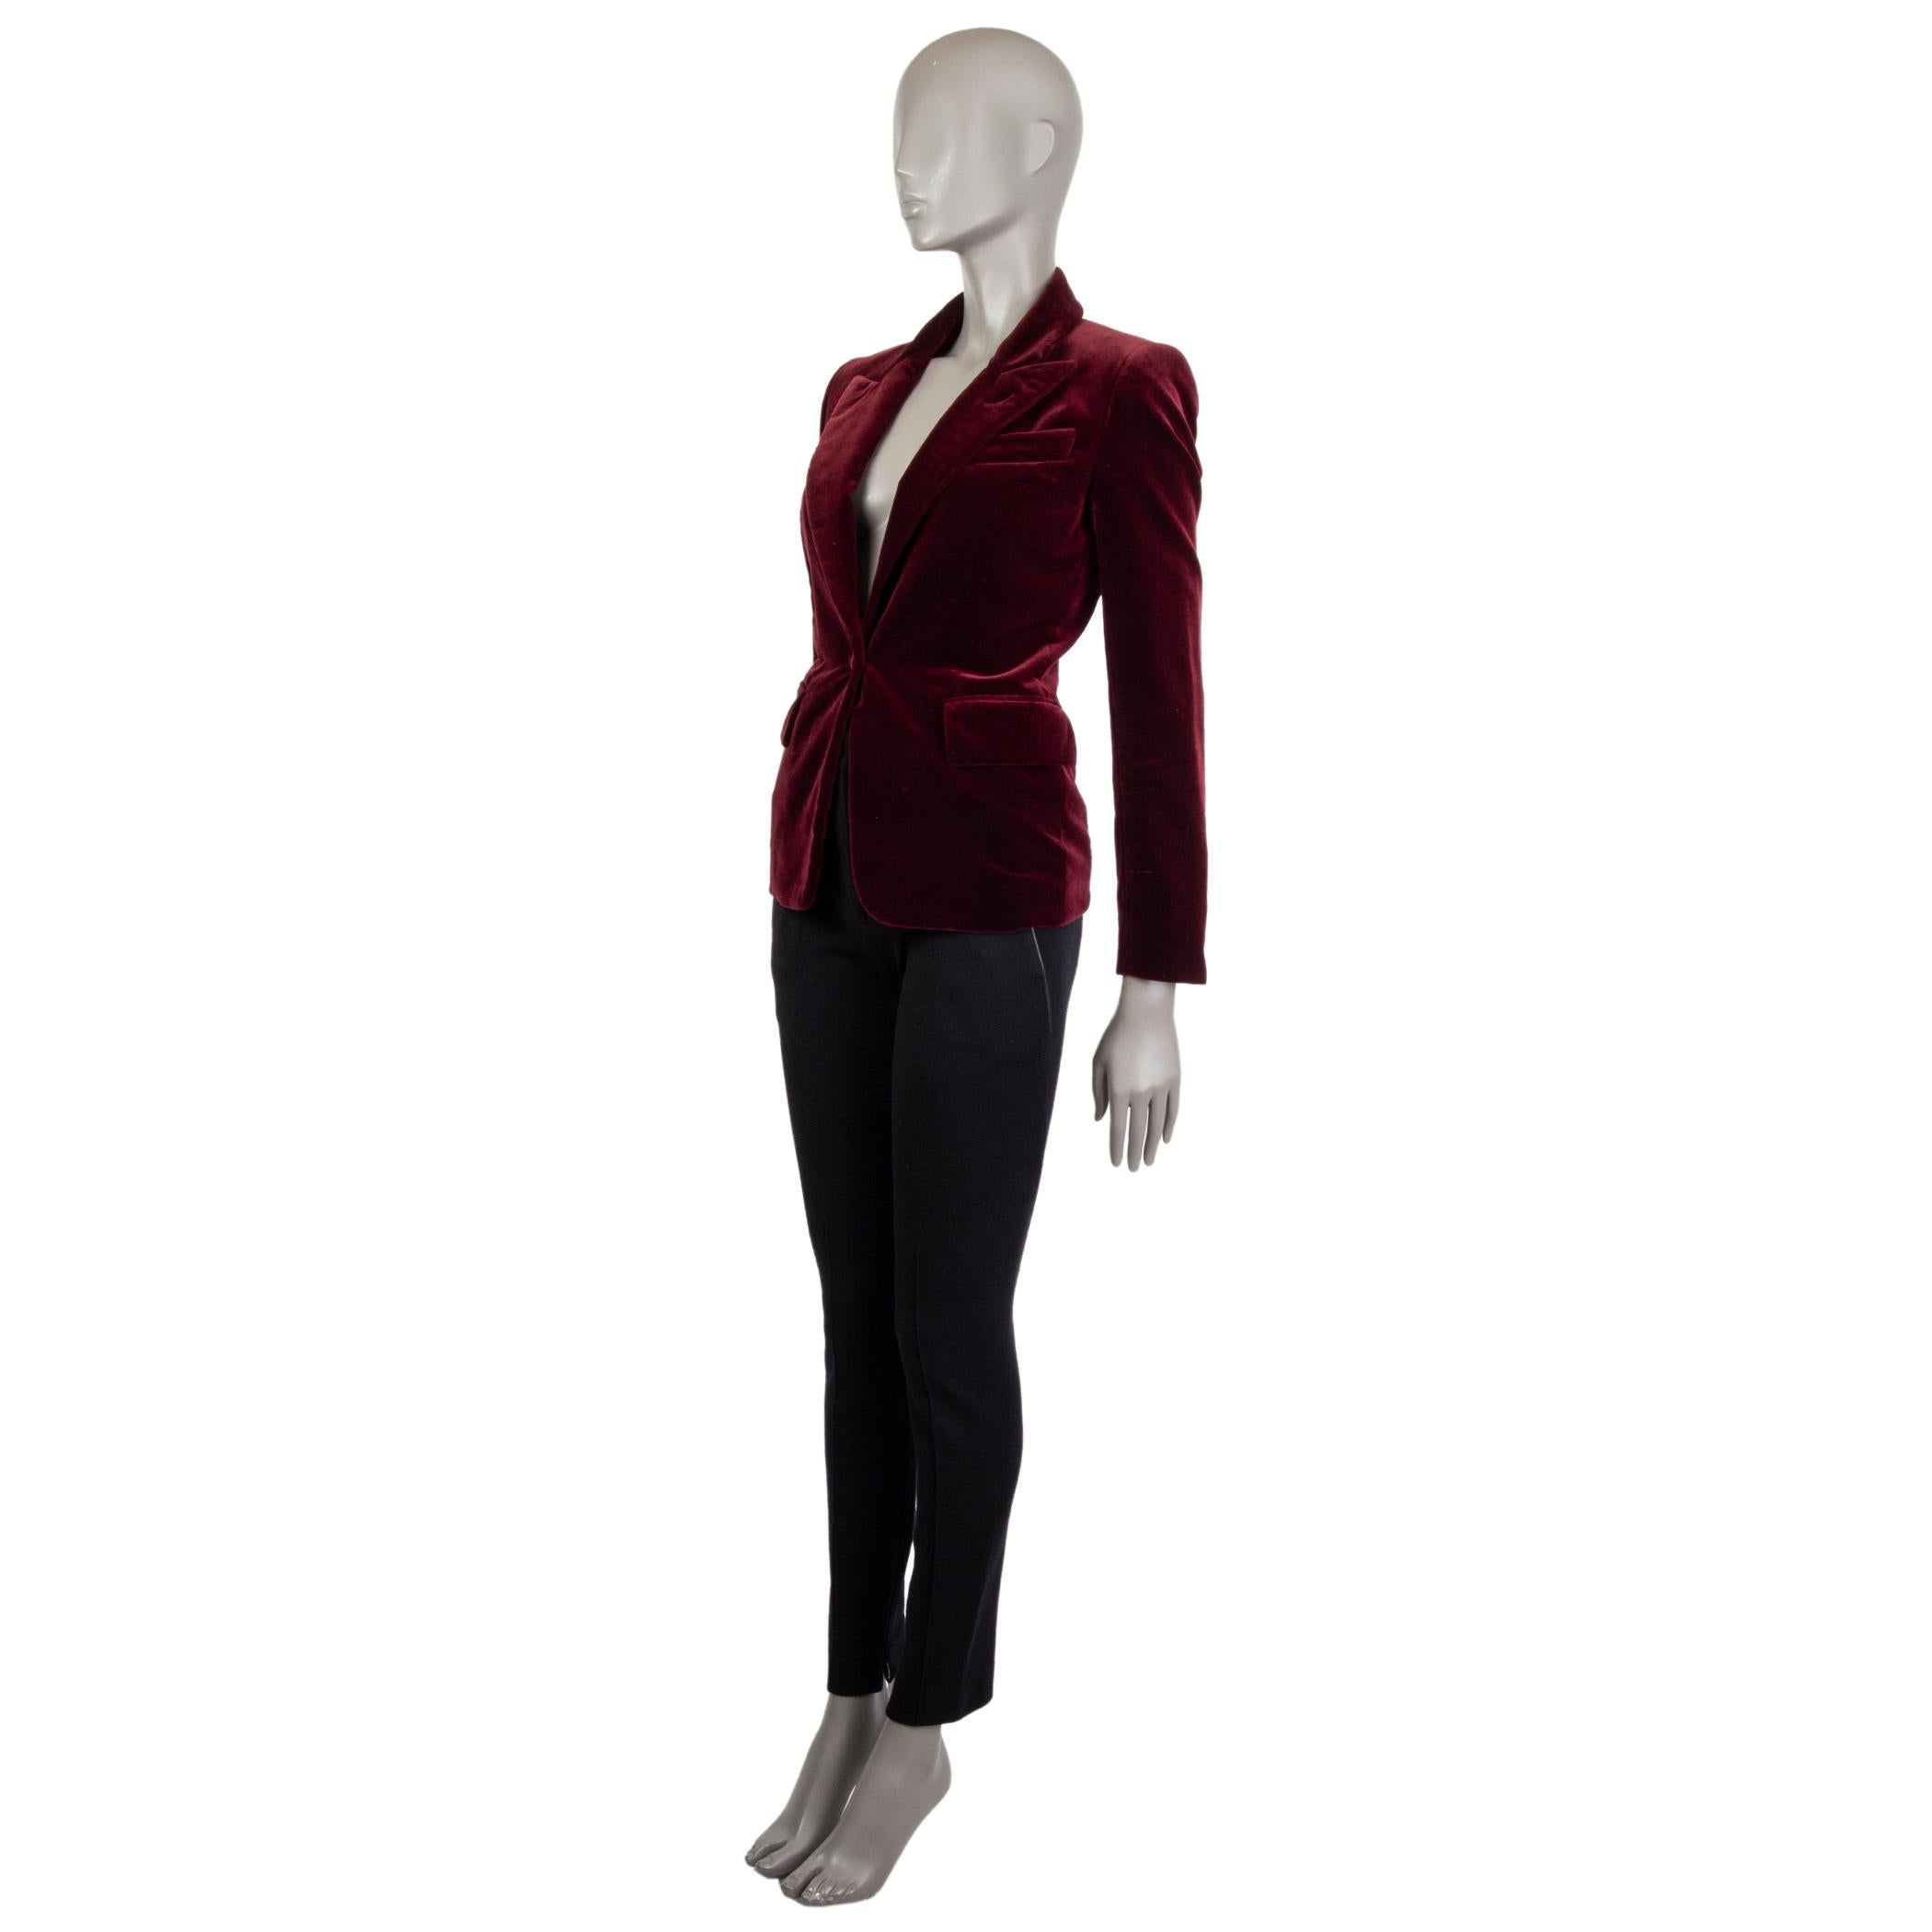 Tom Ford velvet blazer in burgundy cotton (100%). With peak collar, chest pocket, two flap pockets on the sides, and buttoned sleeves. Closes with one button on the front in matching velvet. Lined in deep red satin silk (100%). Has been worn and is